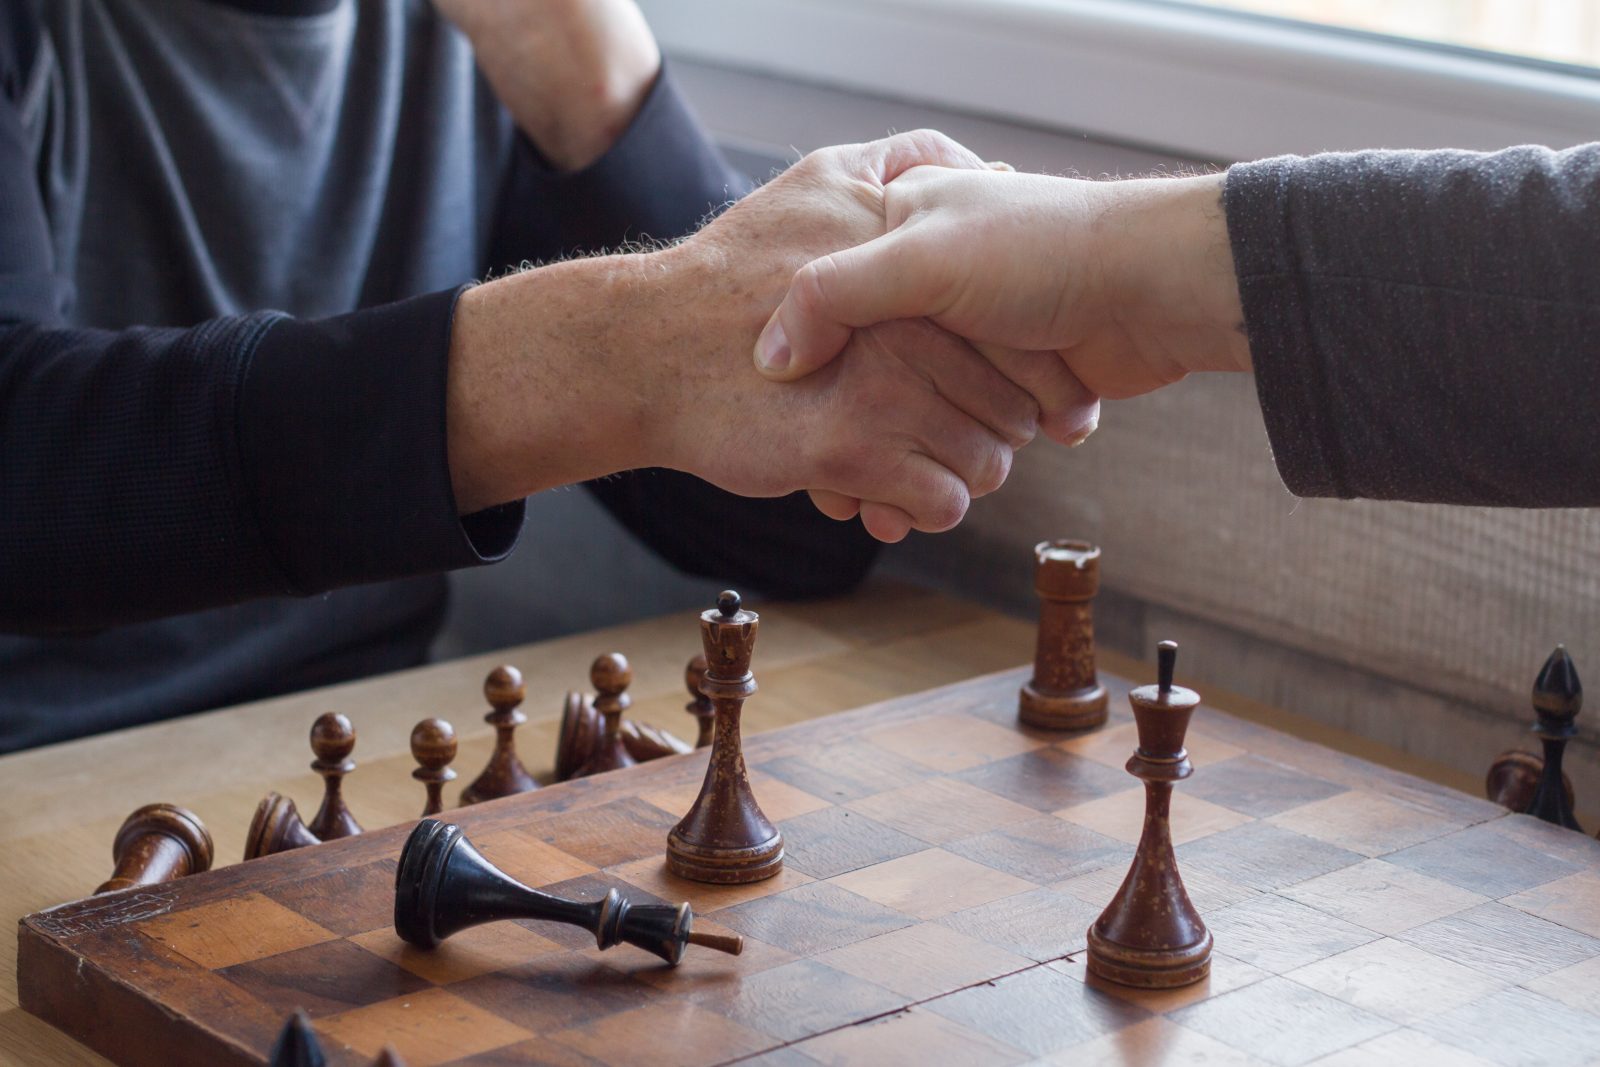 An old man shakes hands with an opponent in a game of chess, he lost and acknowledges it.